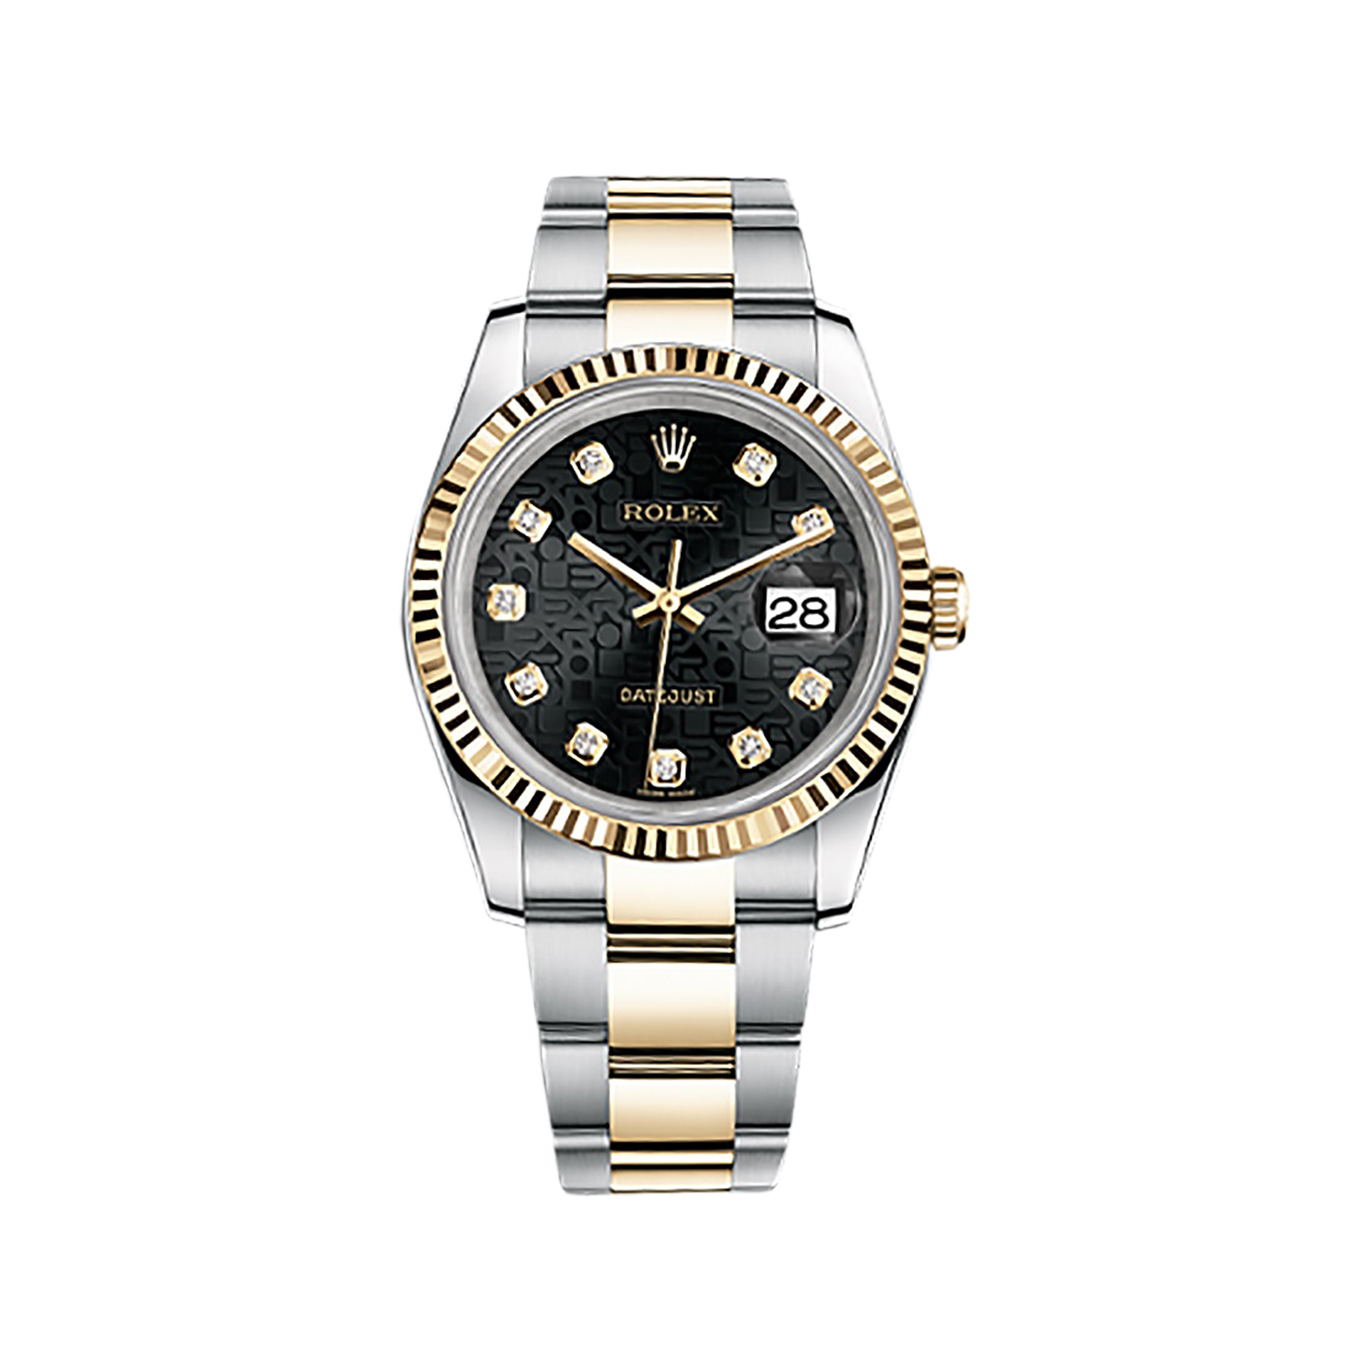 Datejust 36 116233 Gold & Stainless Steel Watch (Black Jubilee Design Set with Diamonds)